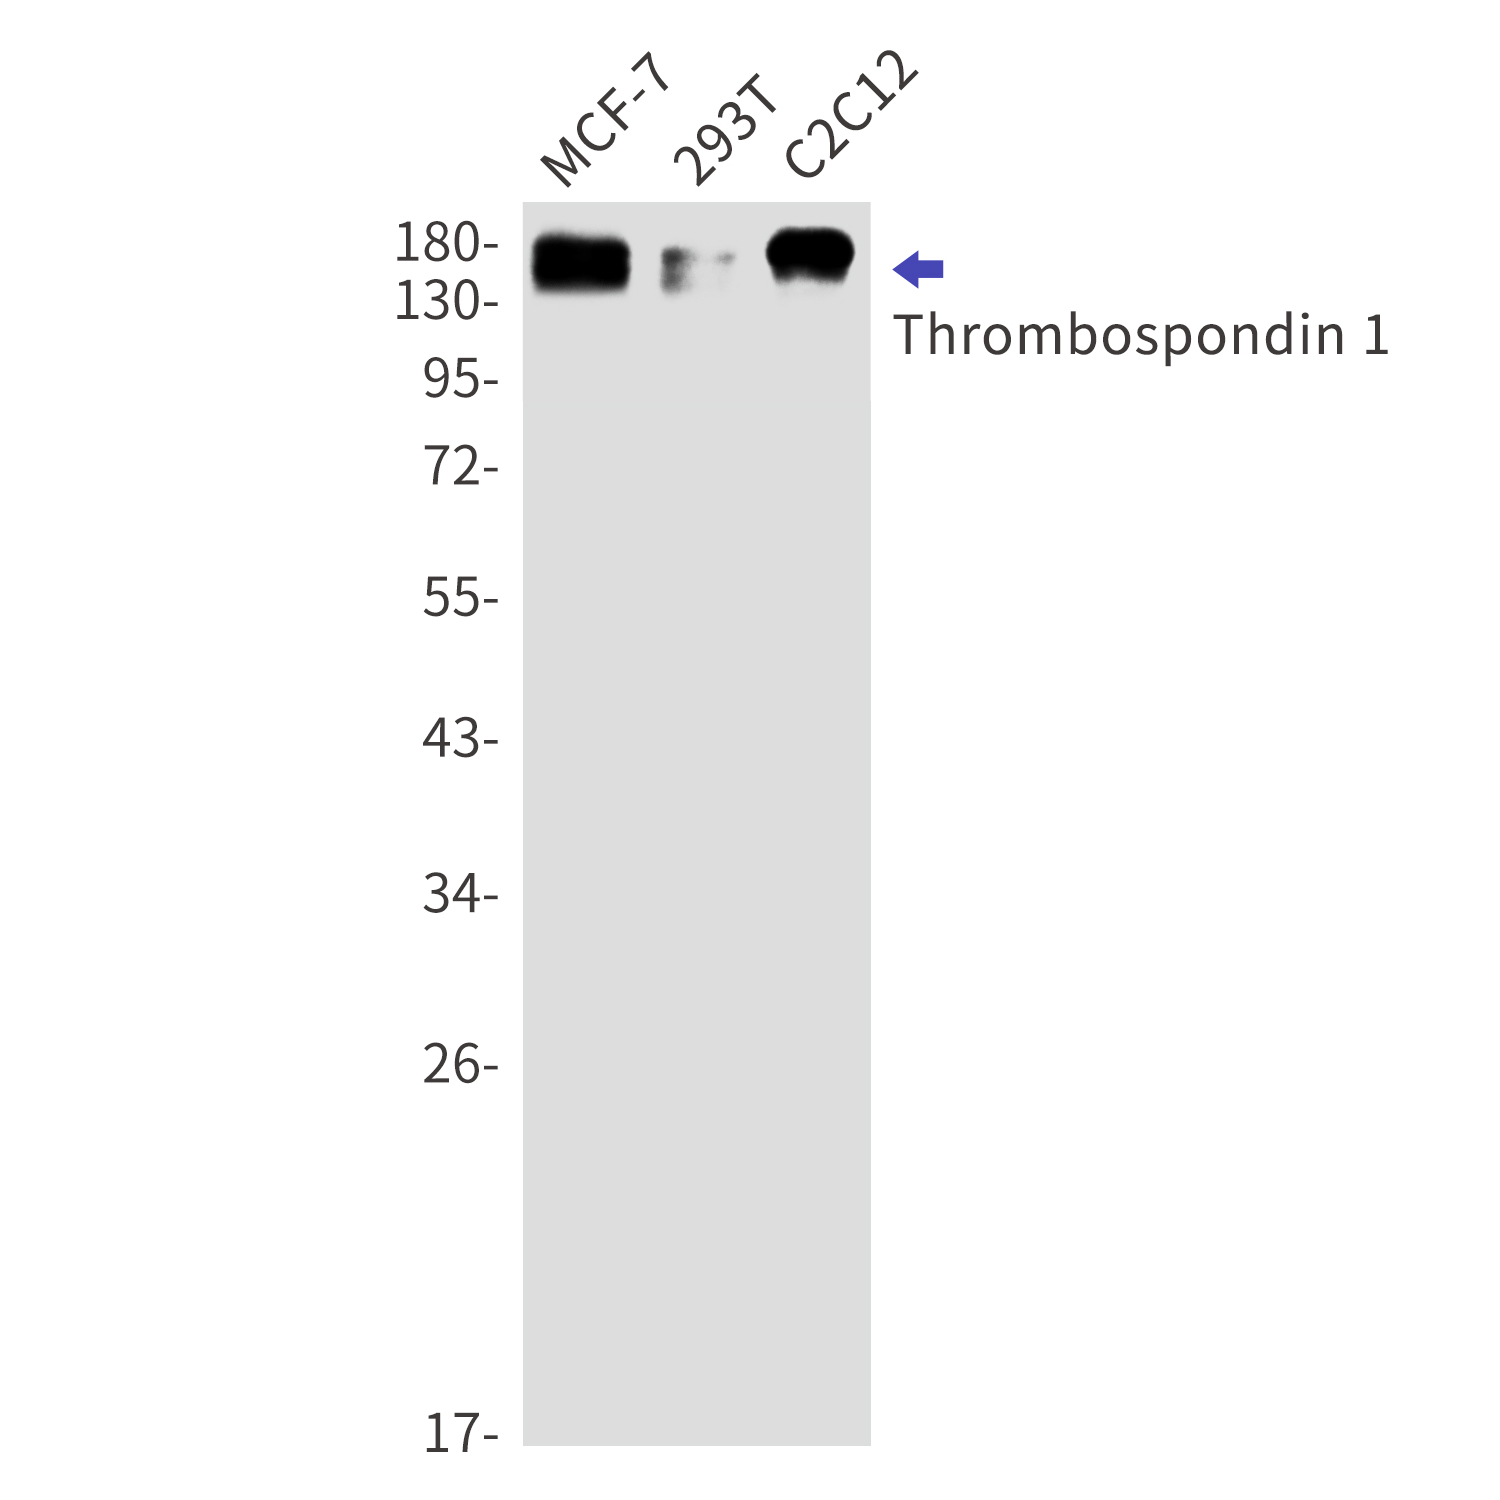 Western blot detection of Thrombospondin 1 in MCF-7,293T,C2C12 cell lysates using Thrombospondin 1 Rabbit mAb(1:1000 diluted).Predicted band size:130kDa.Observed band size:170kDa.